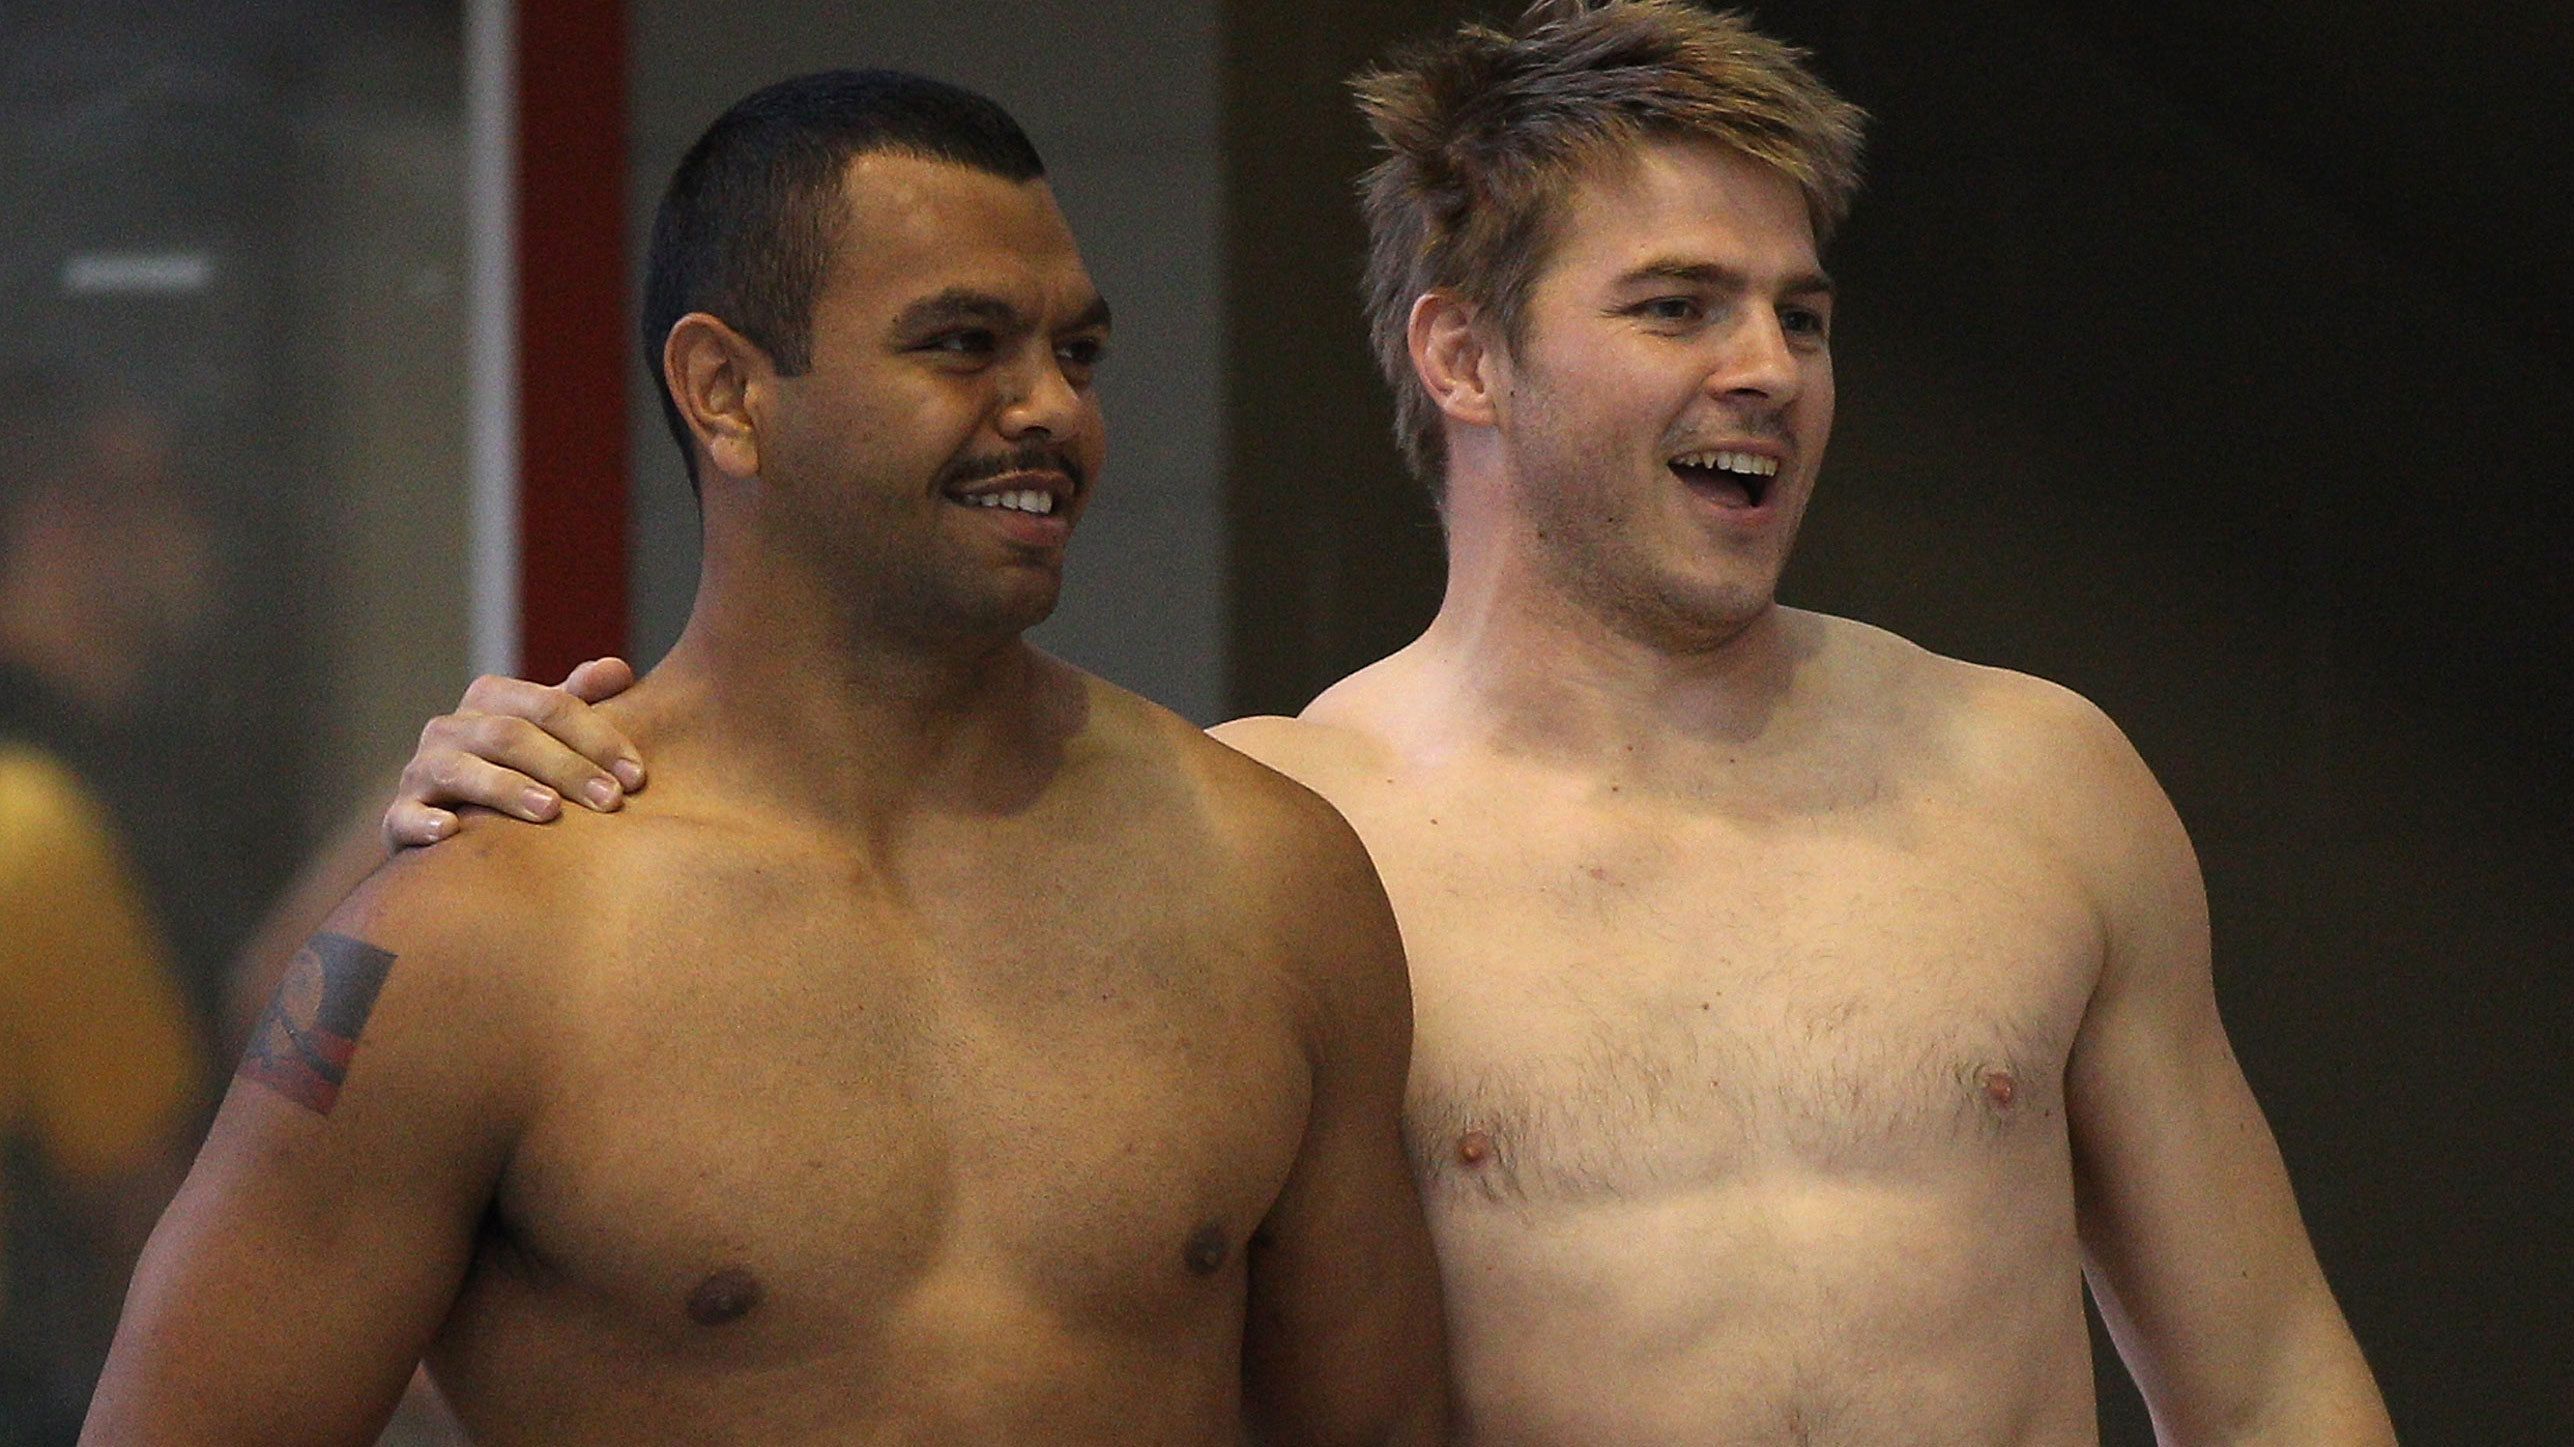 Kurtley Beale and Drew Mitchell at a 2011 Rugby World Cup recovery session.